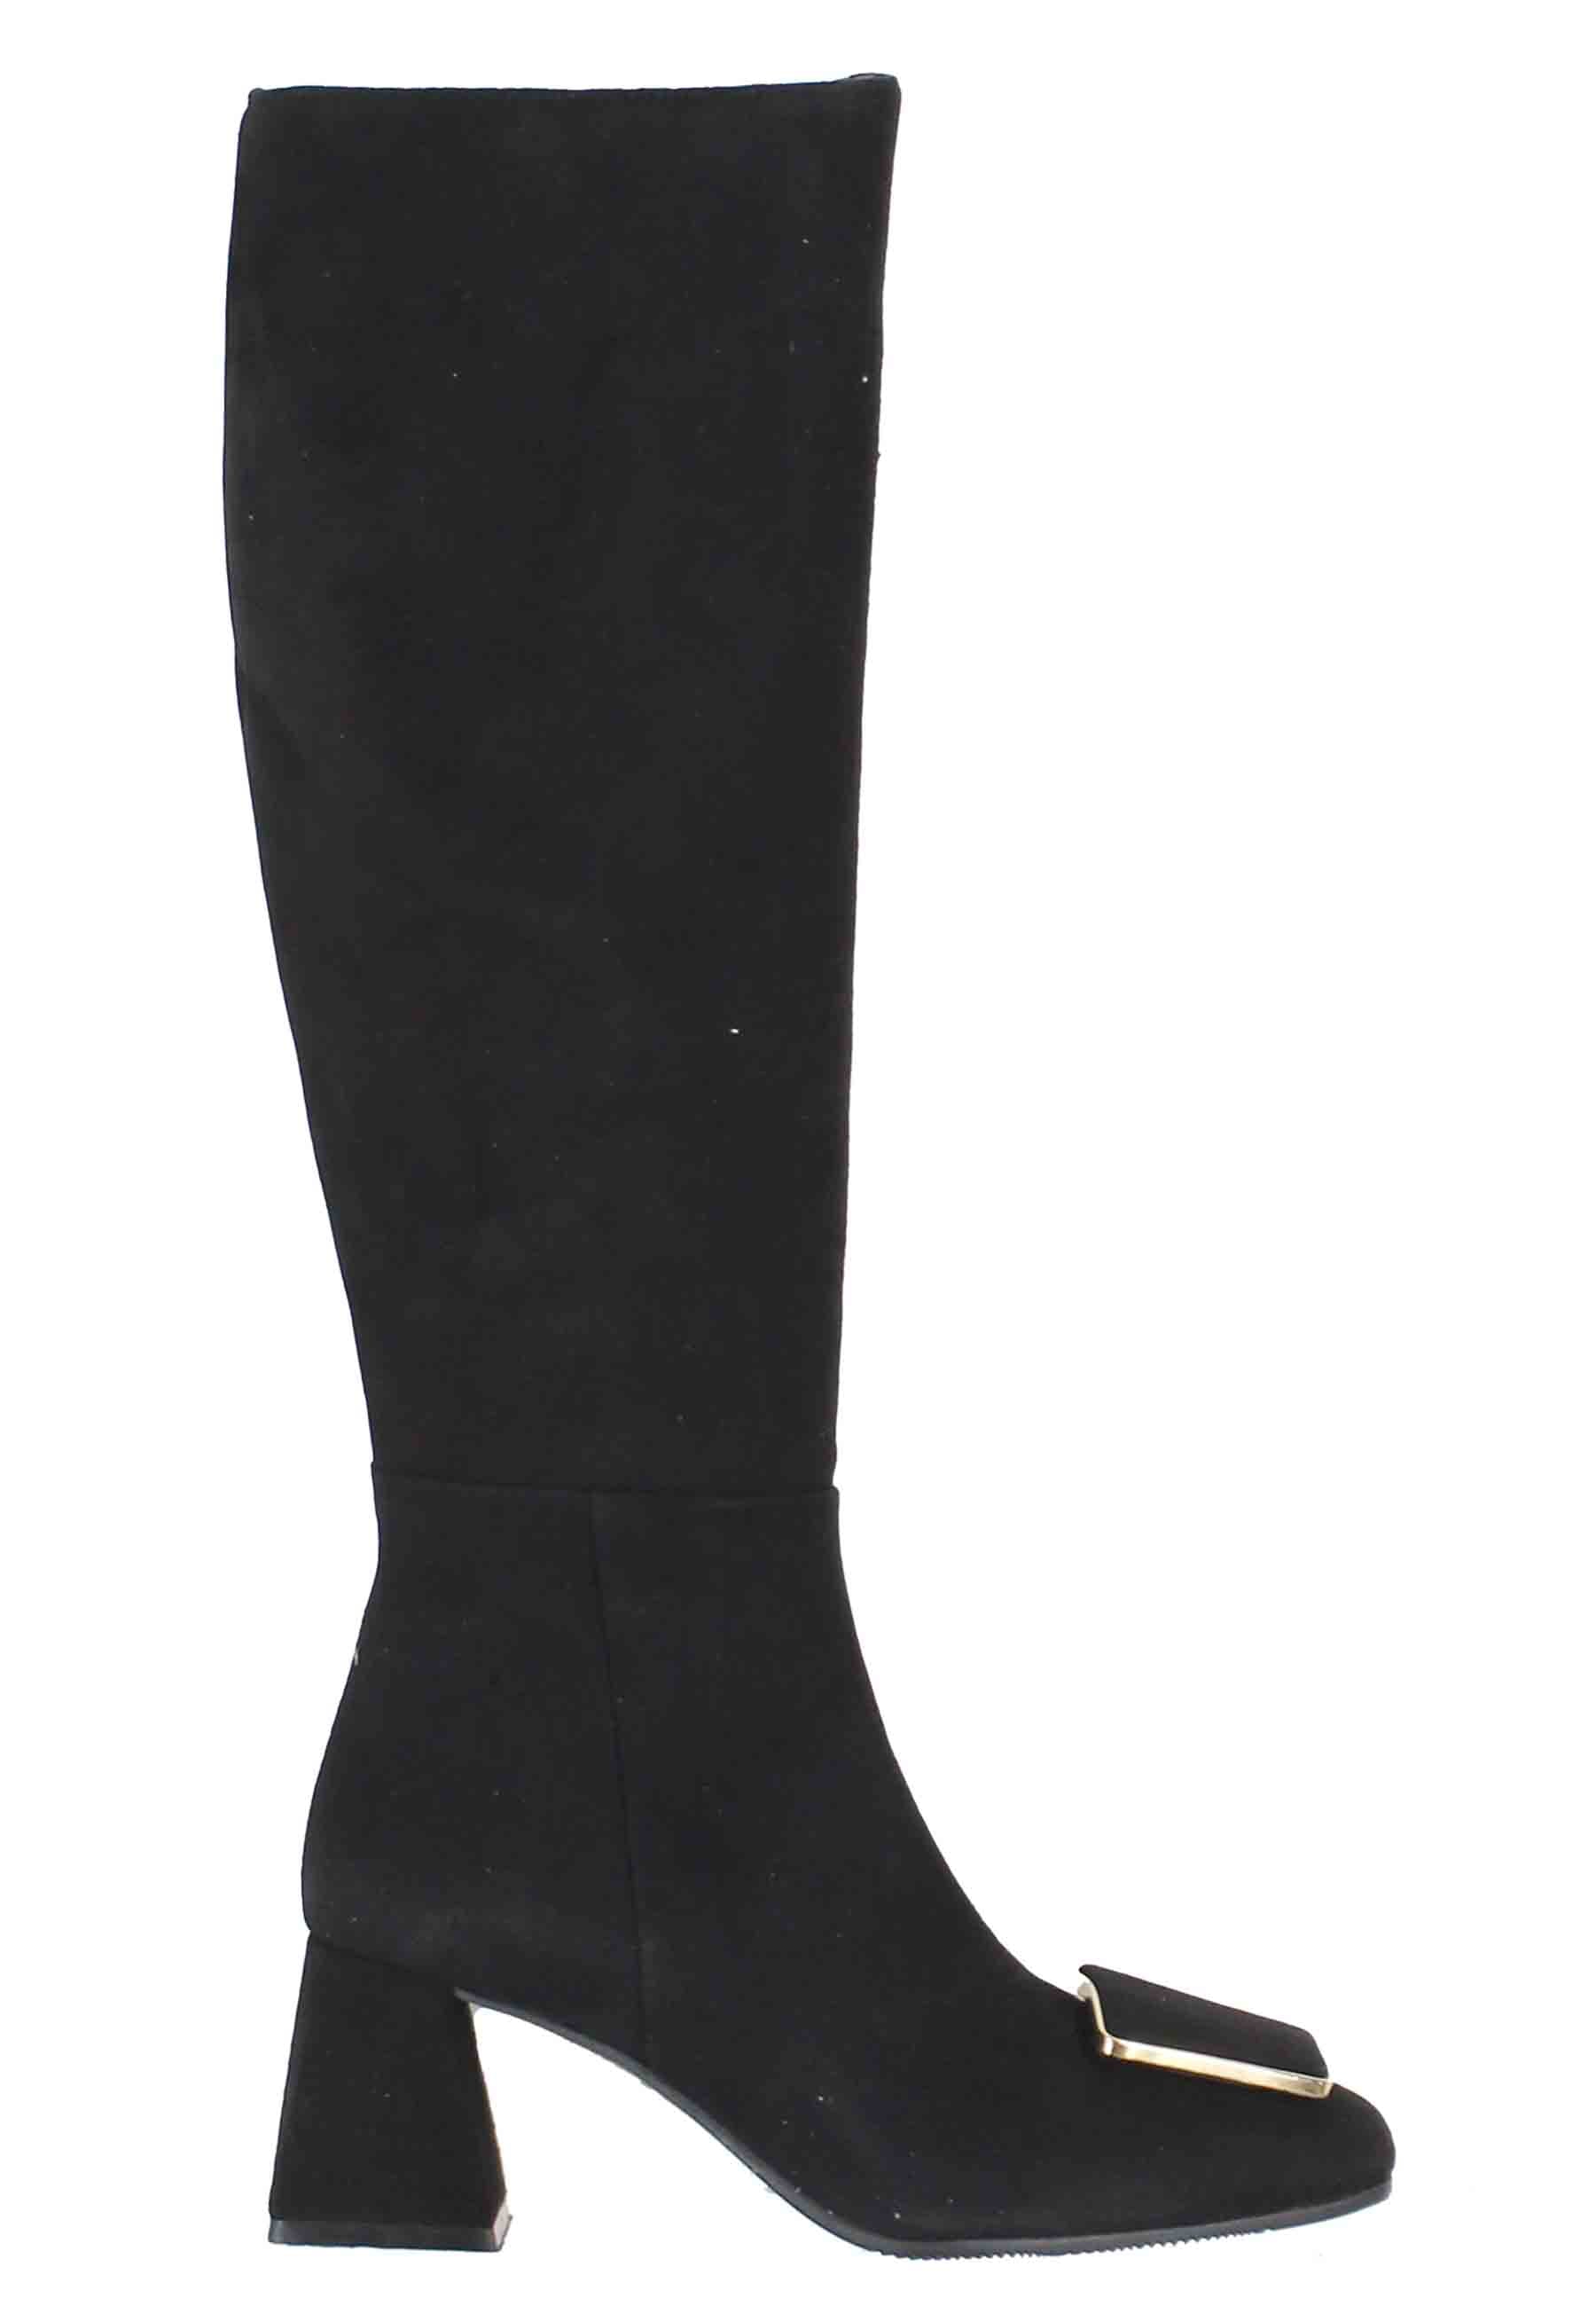 Women's boots in black suede with buckle